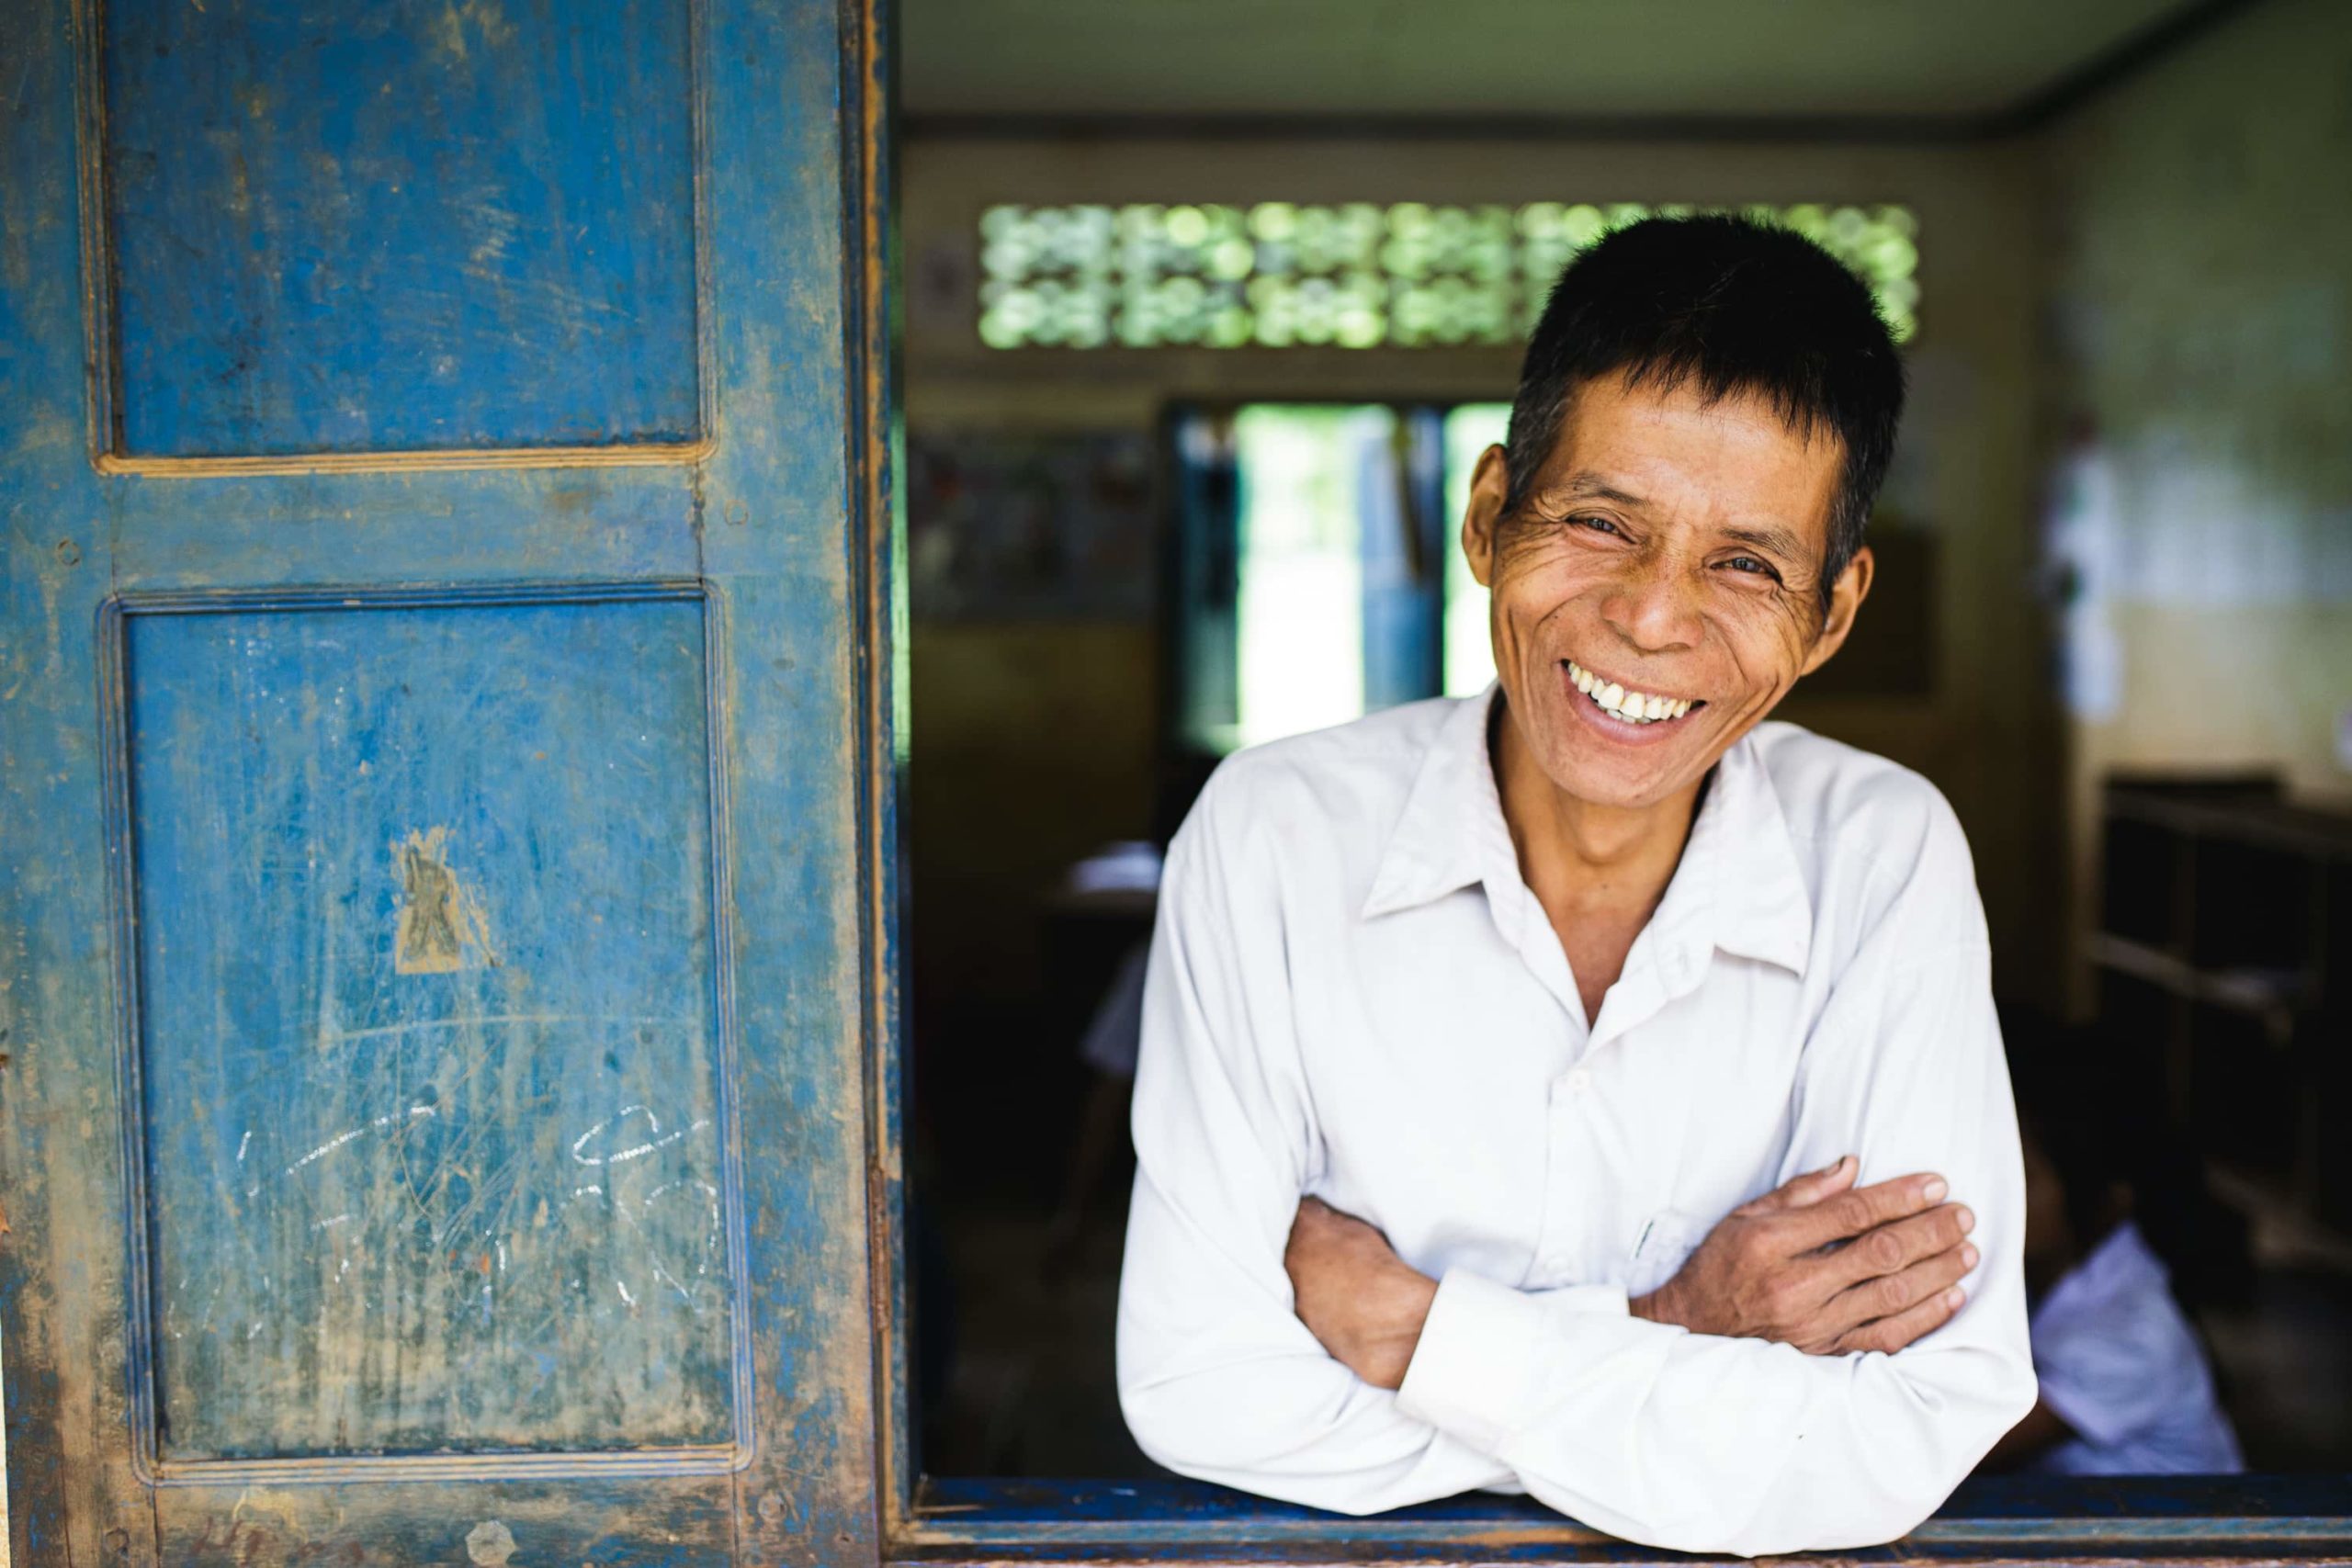 A teacher in Laos looks out of the window of the classroom and smiles.